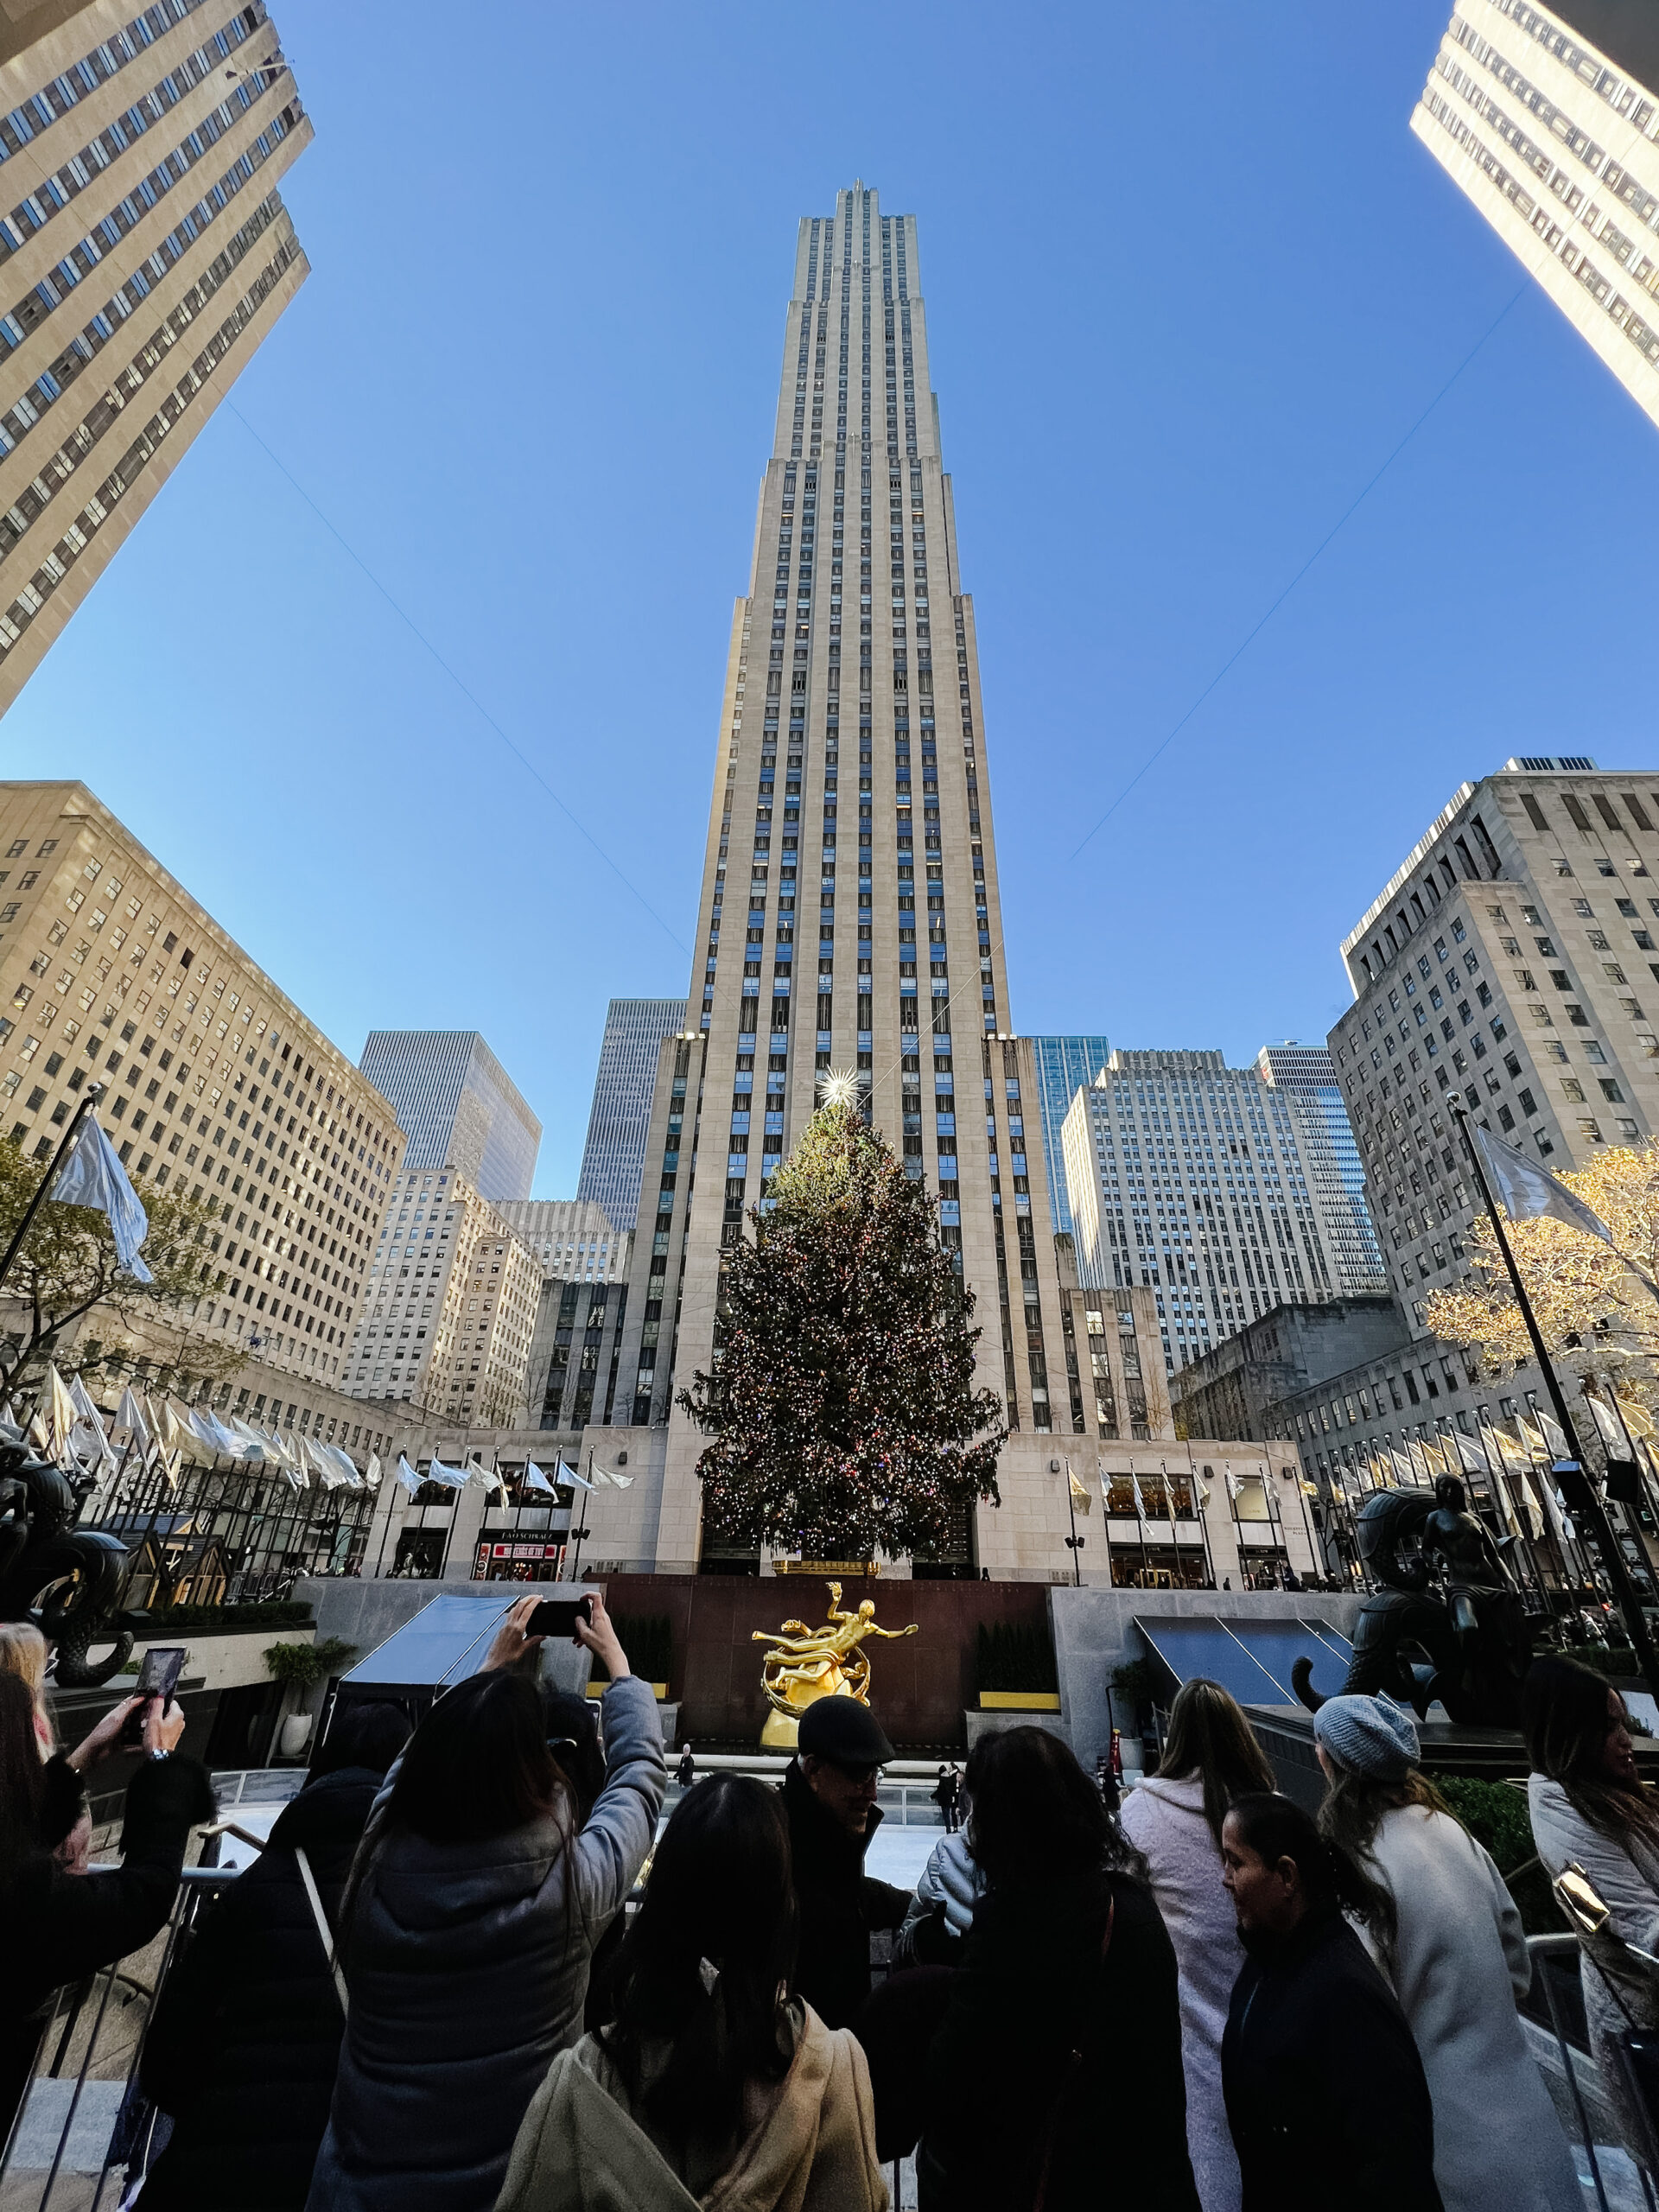 View of the Rockefeller Plaza Christmas tree.